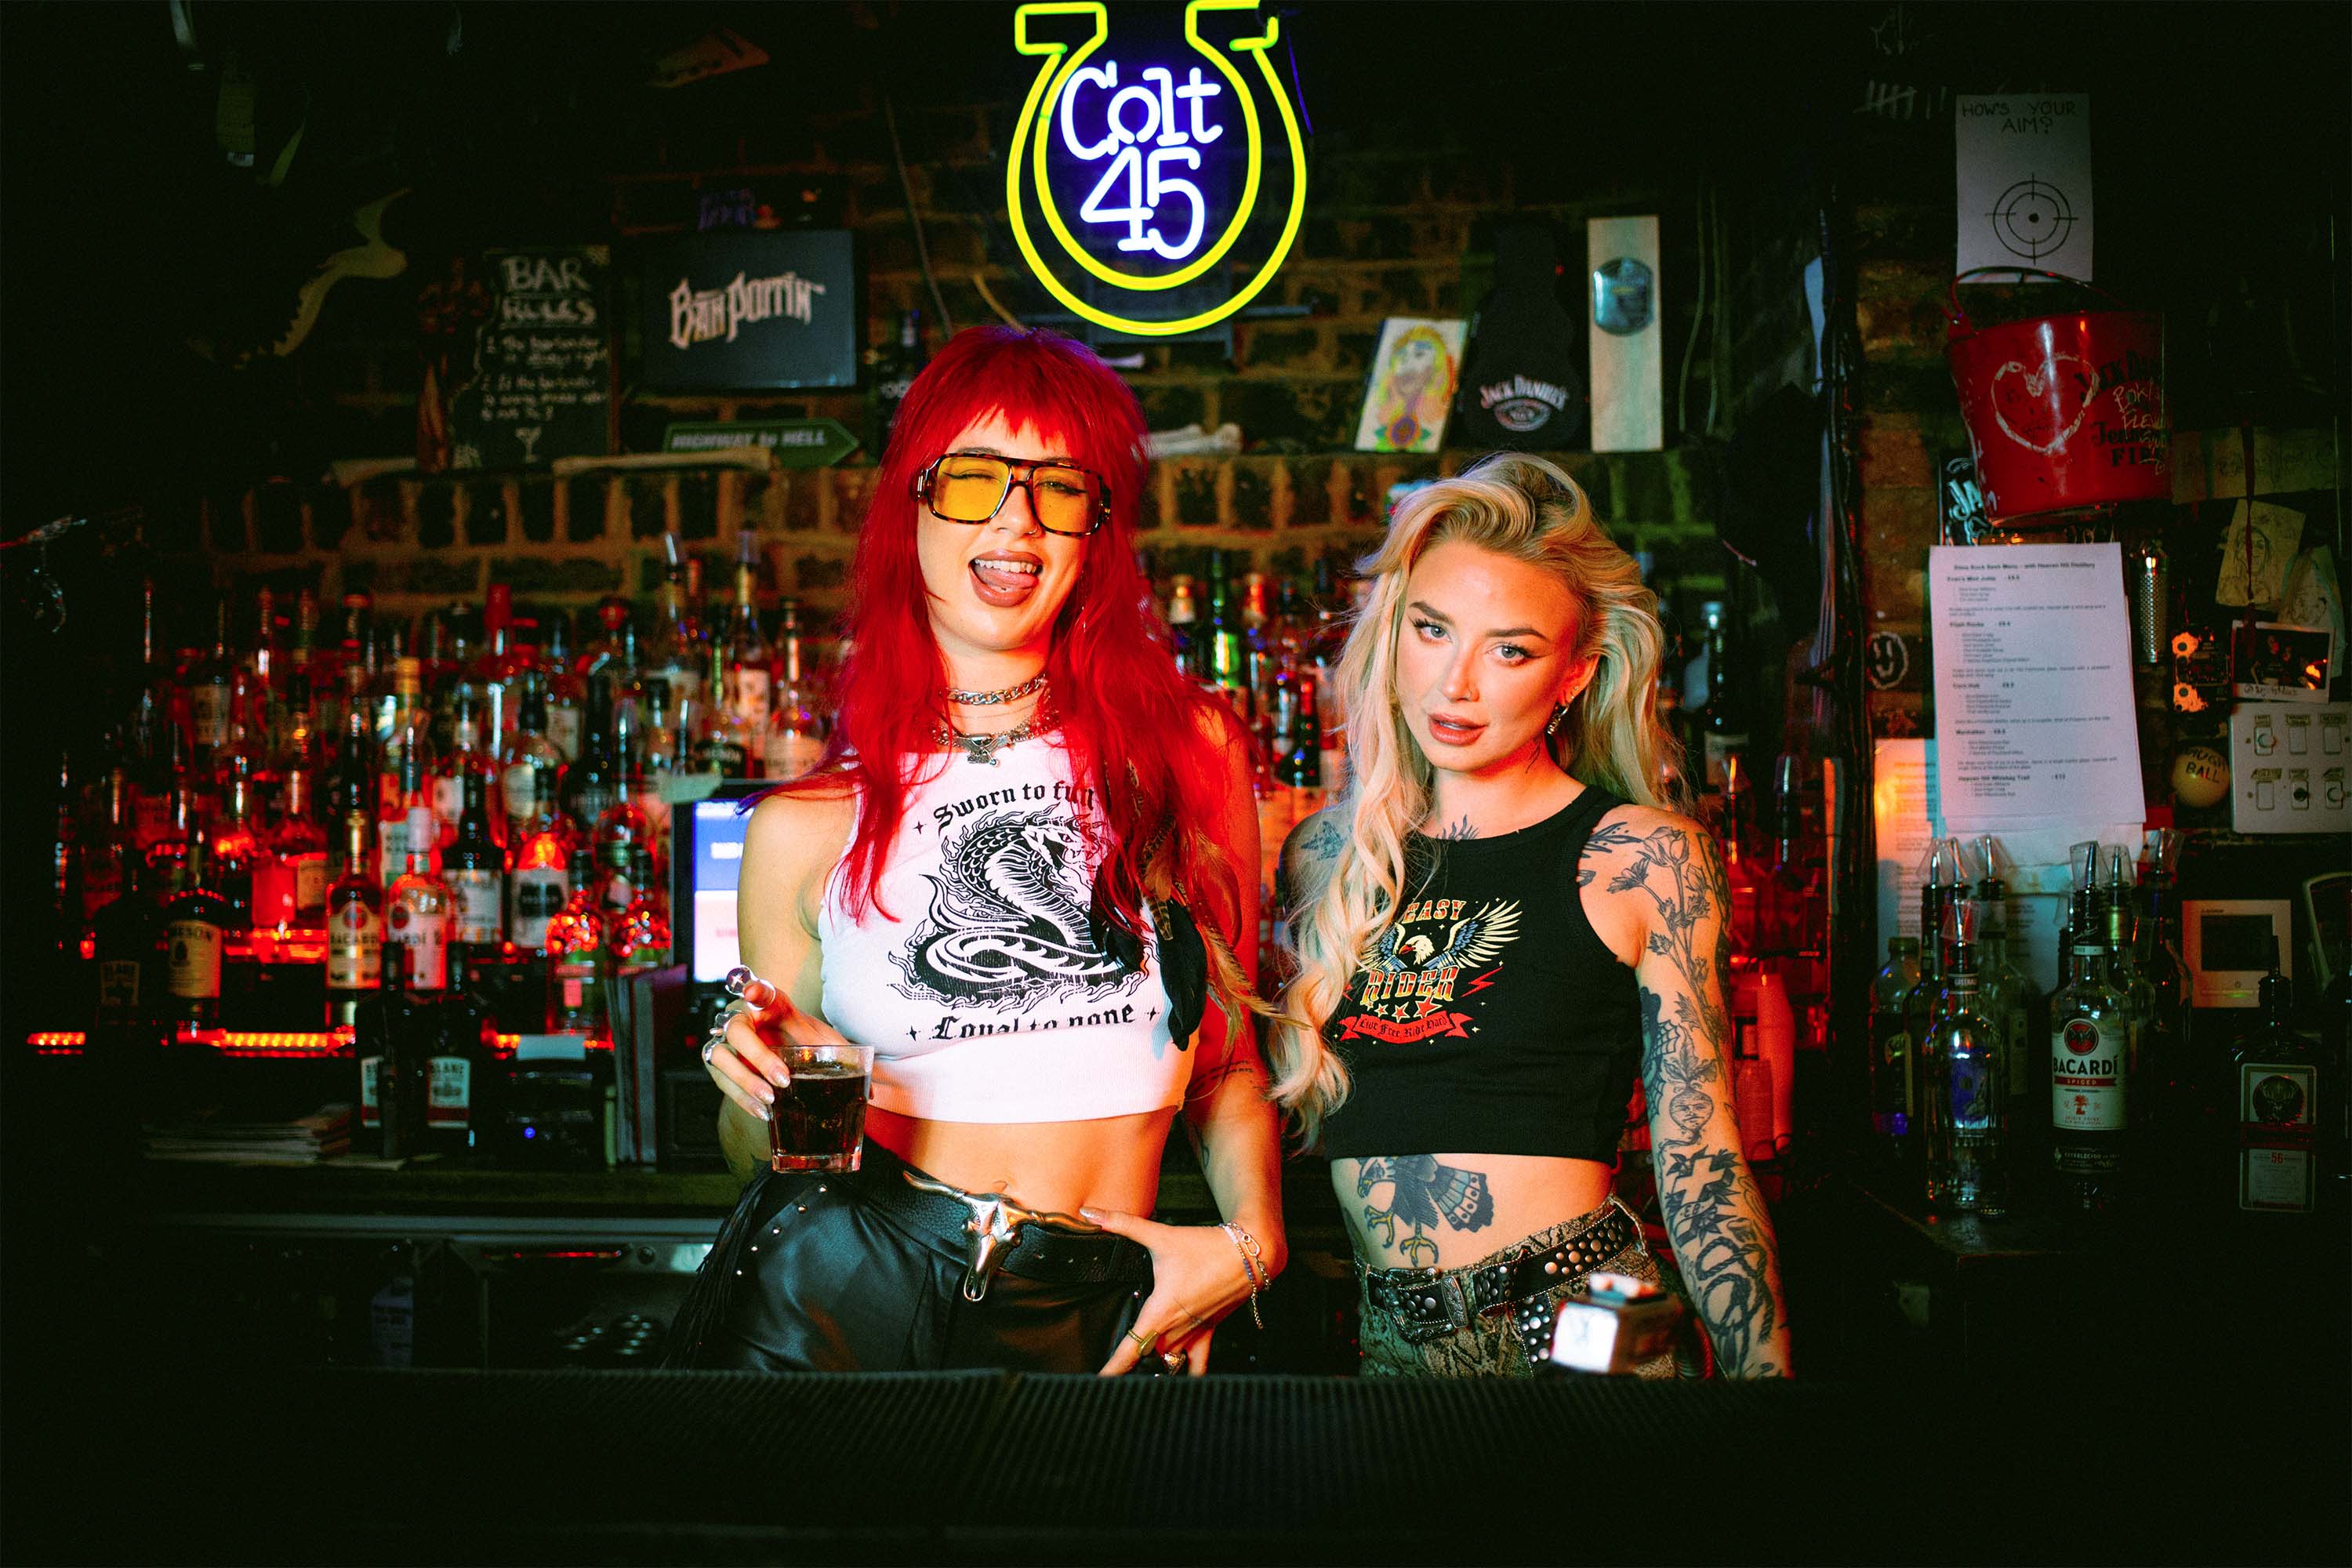 Amy Valentine and Rhianon Brailsford wearing Sleazy Rider tank tops in a dive bar